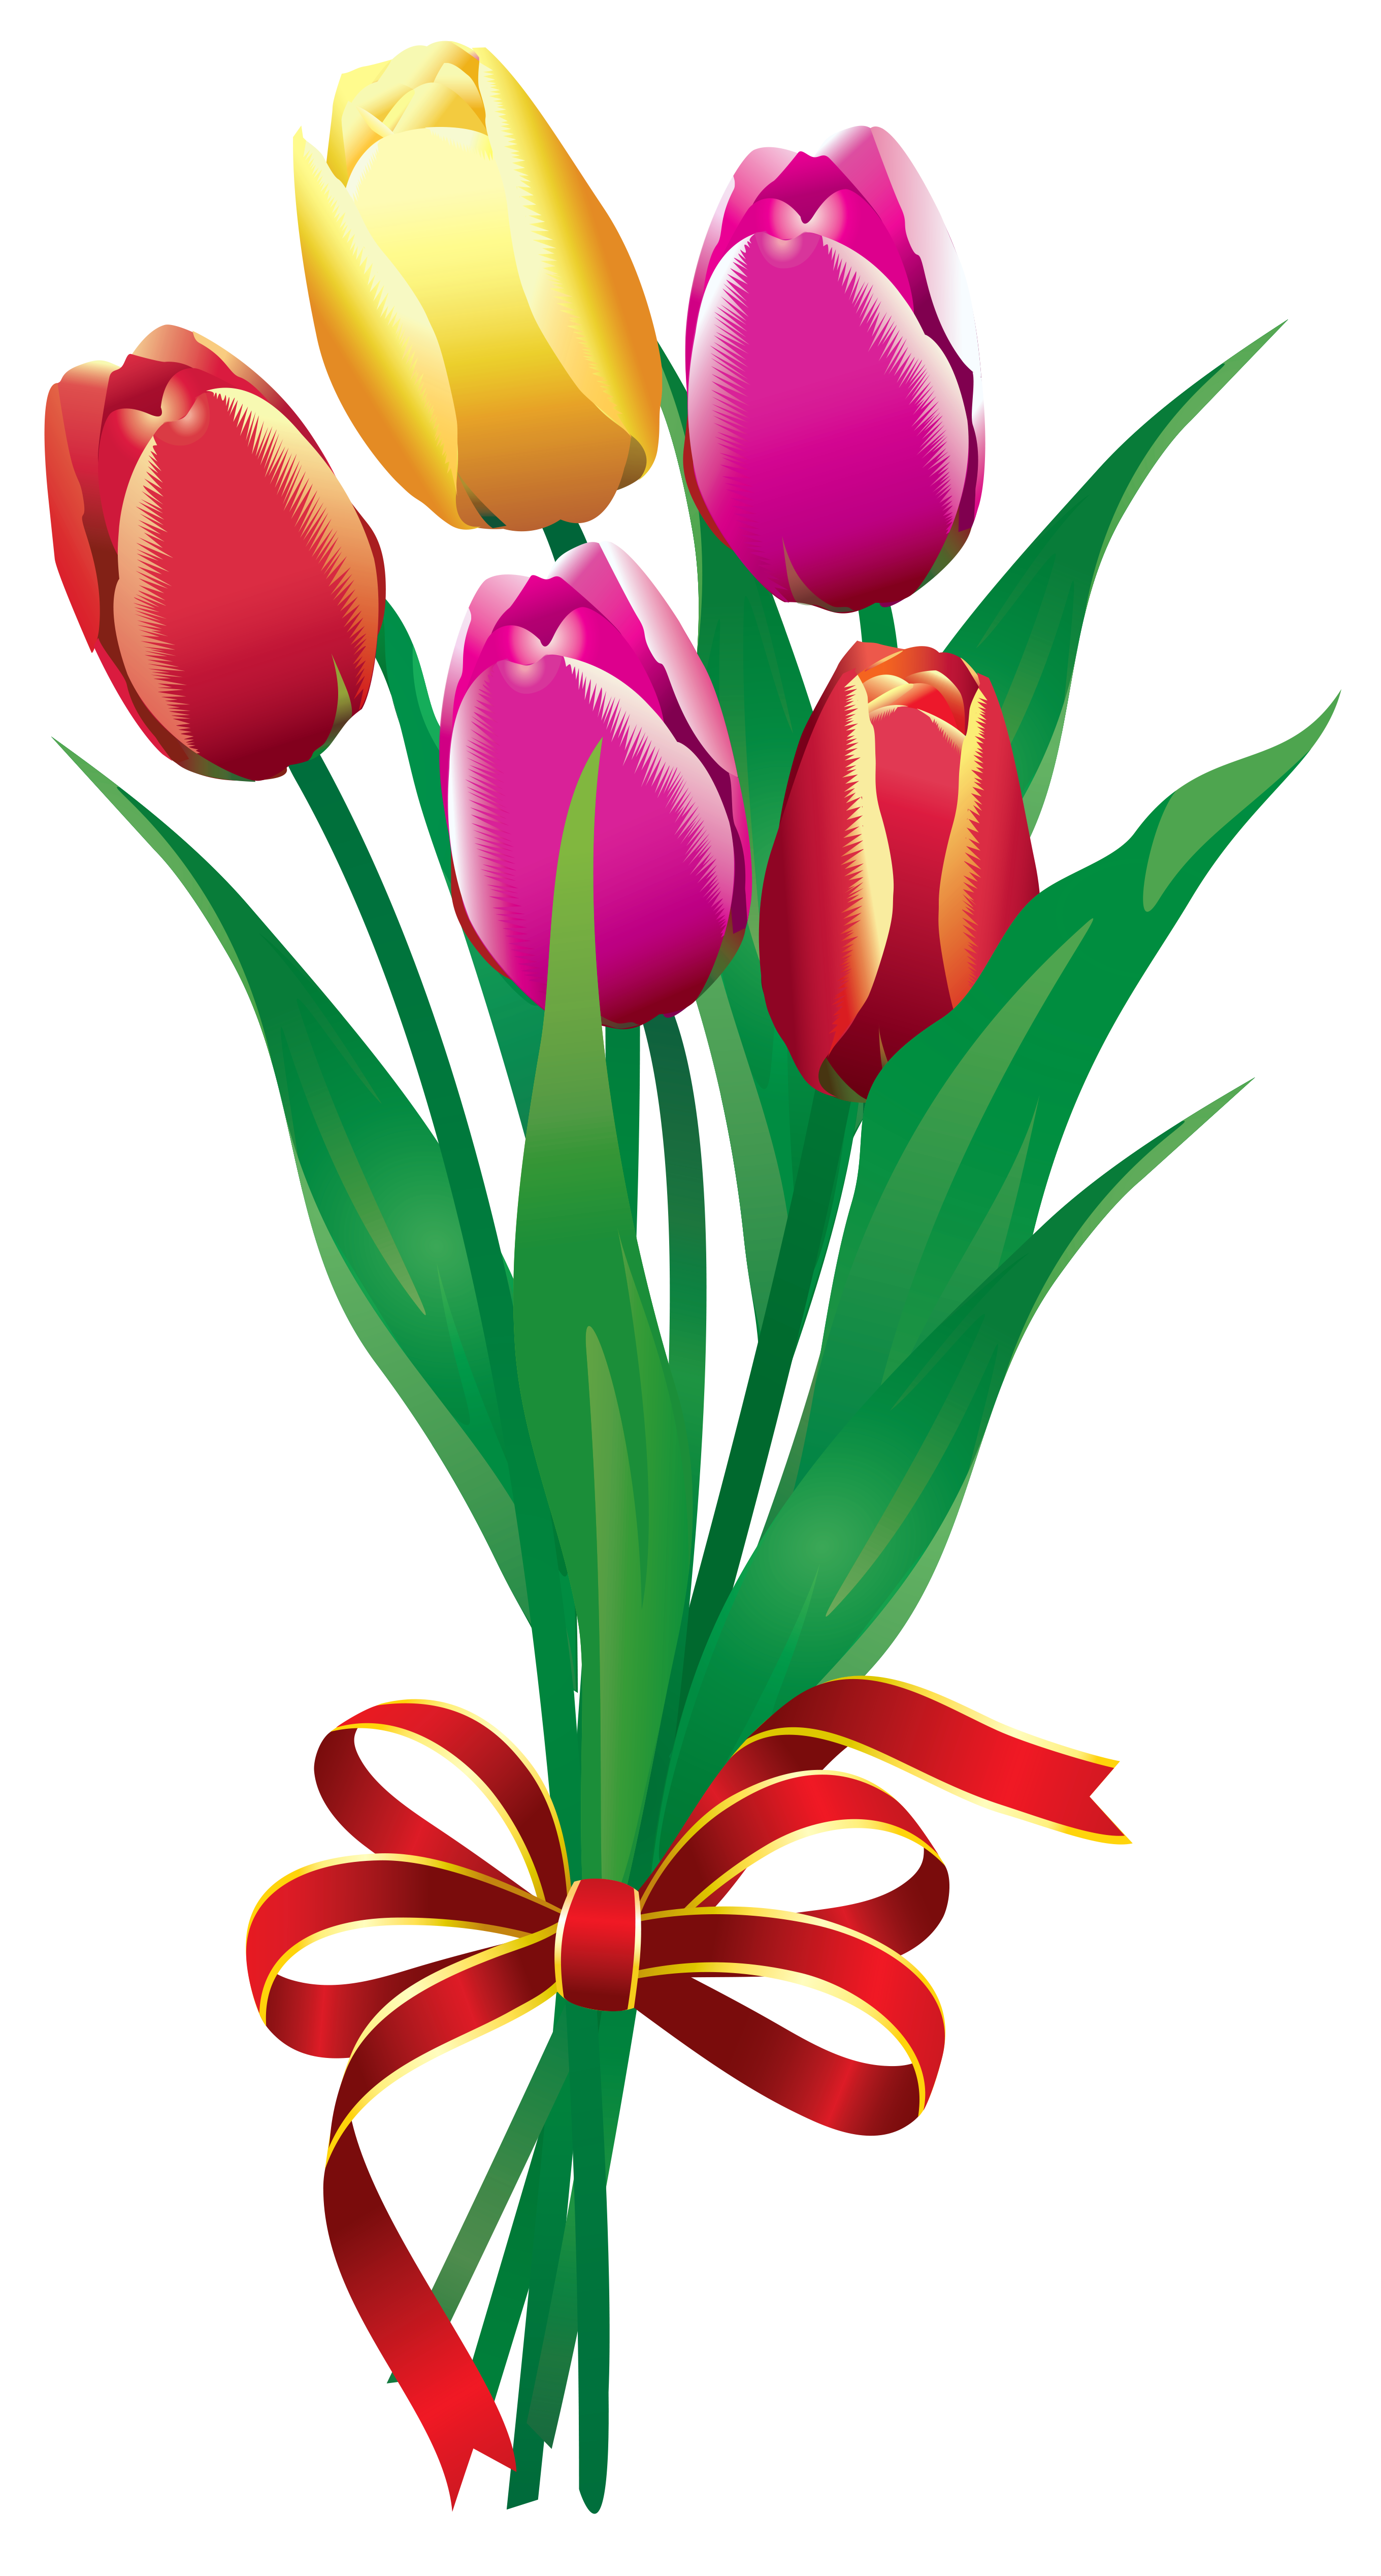 Spring Tulips Bouquet PNG Clipart Picture